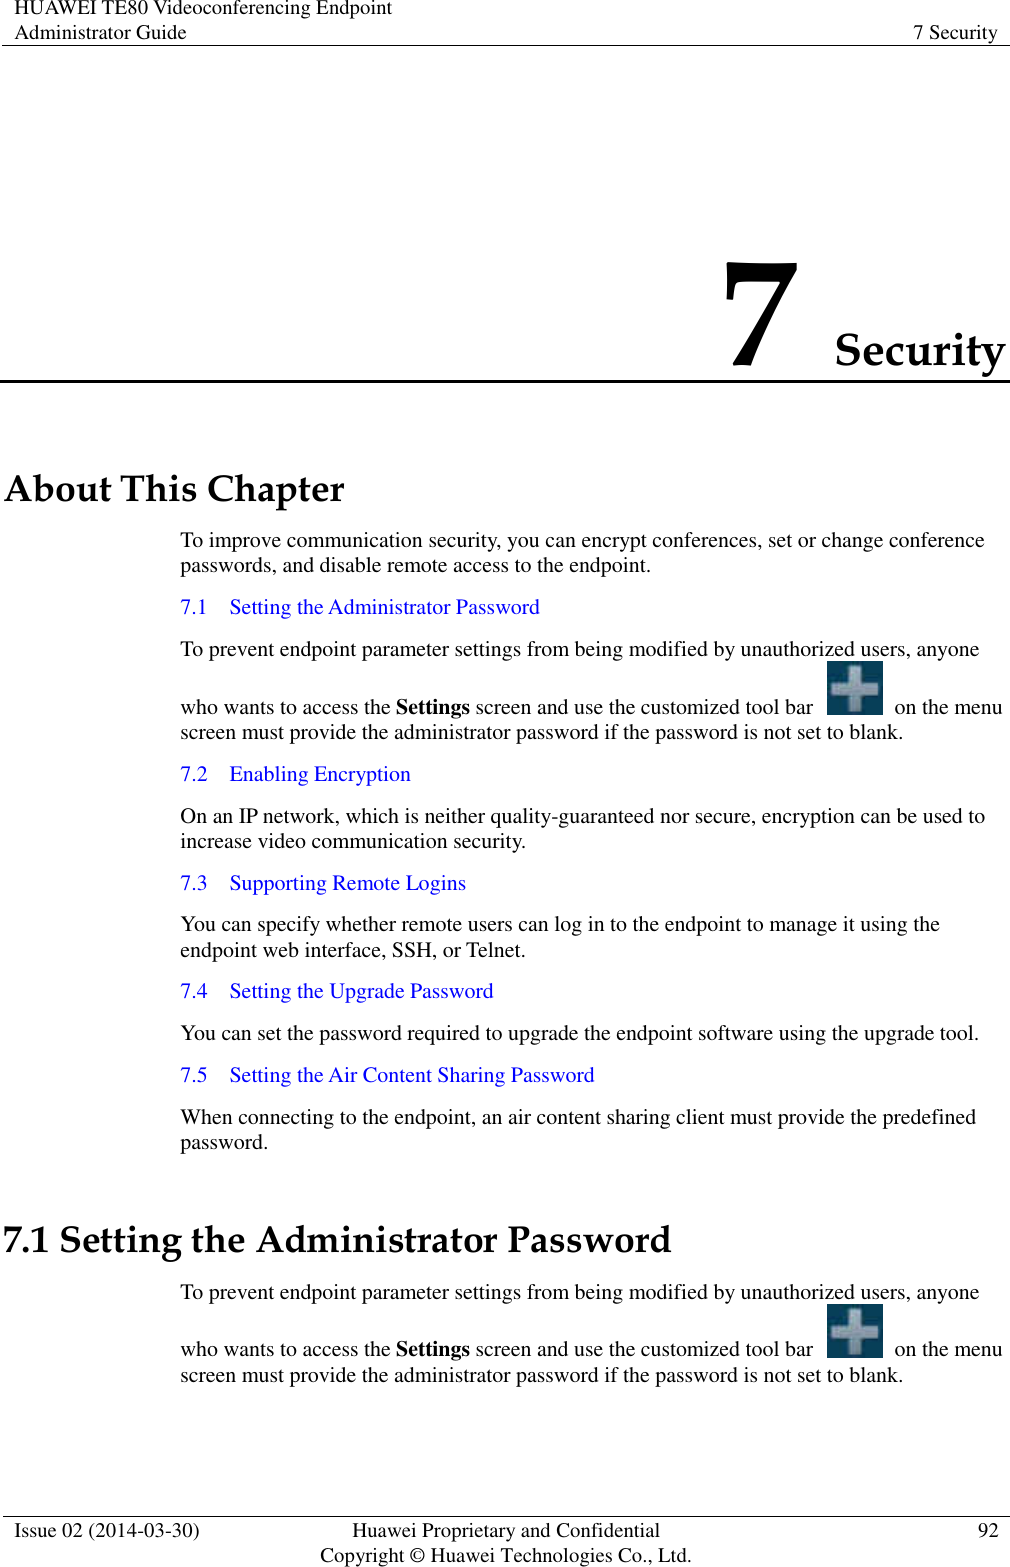 HUAWEI TE80 Videoconferencing Endpoint Administrator Guide 7 Security  Issue 02 (2014-03-30) Huawei Proprietary and Confidential Copyright © Huawei Technologies Co., Ltd. 92  7 Security About This Chapter To improve communication security, you can encrypt conferences, set or change conference passwords, and disable remote access to the endpoint. 7.1    Setting the Administrator Password To prevent endpoint parameter settings from being modified by unauthorized users, anyone who wants to access the Settings screen and use the customized tool bar    on the menu screen must provide the administrator password if the password is not set to blank. 7.2    Enabling Encryption On an IP network, which is neither quality-guaranteed nor secure, encryption can be used to increase video communication security. 7.3    Supporting Remote Logins You can specify whether remote users can log in to the endpoint to manage it using the endpoint web interface, SSH, or Telnet. 7.4    Setting the Upgrade Password You can set the password required to upgrade the endpoint software using the upgrade tool. 7.5    Setting the Air Content Sharing Password When connecting to the endpoint, an air content sharing client must provide the predefined password. 7.1 Setting the Administrator Password To prevent endpoint parameter settings from being modified by unauthorized users, anyone who wants to access the Settings screen and use the customized tool bar    on the menu screen must provide the administrator password if the password is not set to blank. 